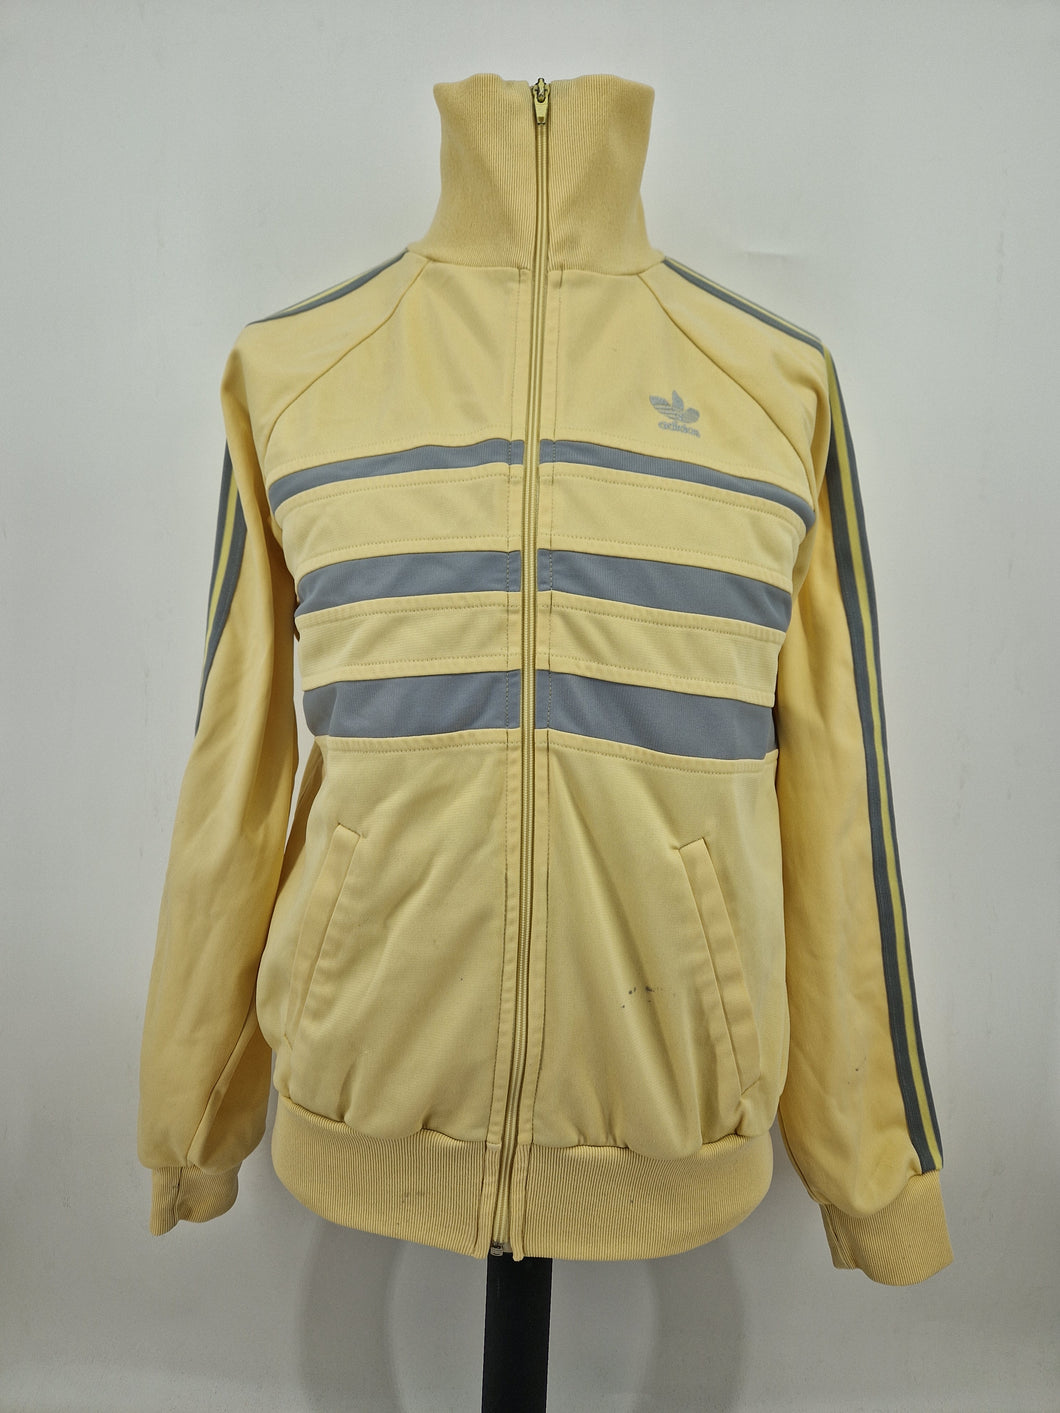 80s adidas Originals First Vintage Track Top 186 L Yellow Grey made in England GRADE B